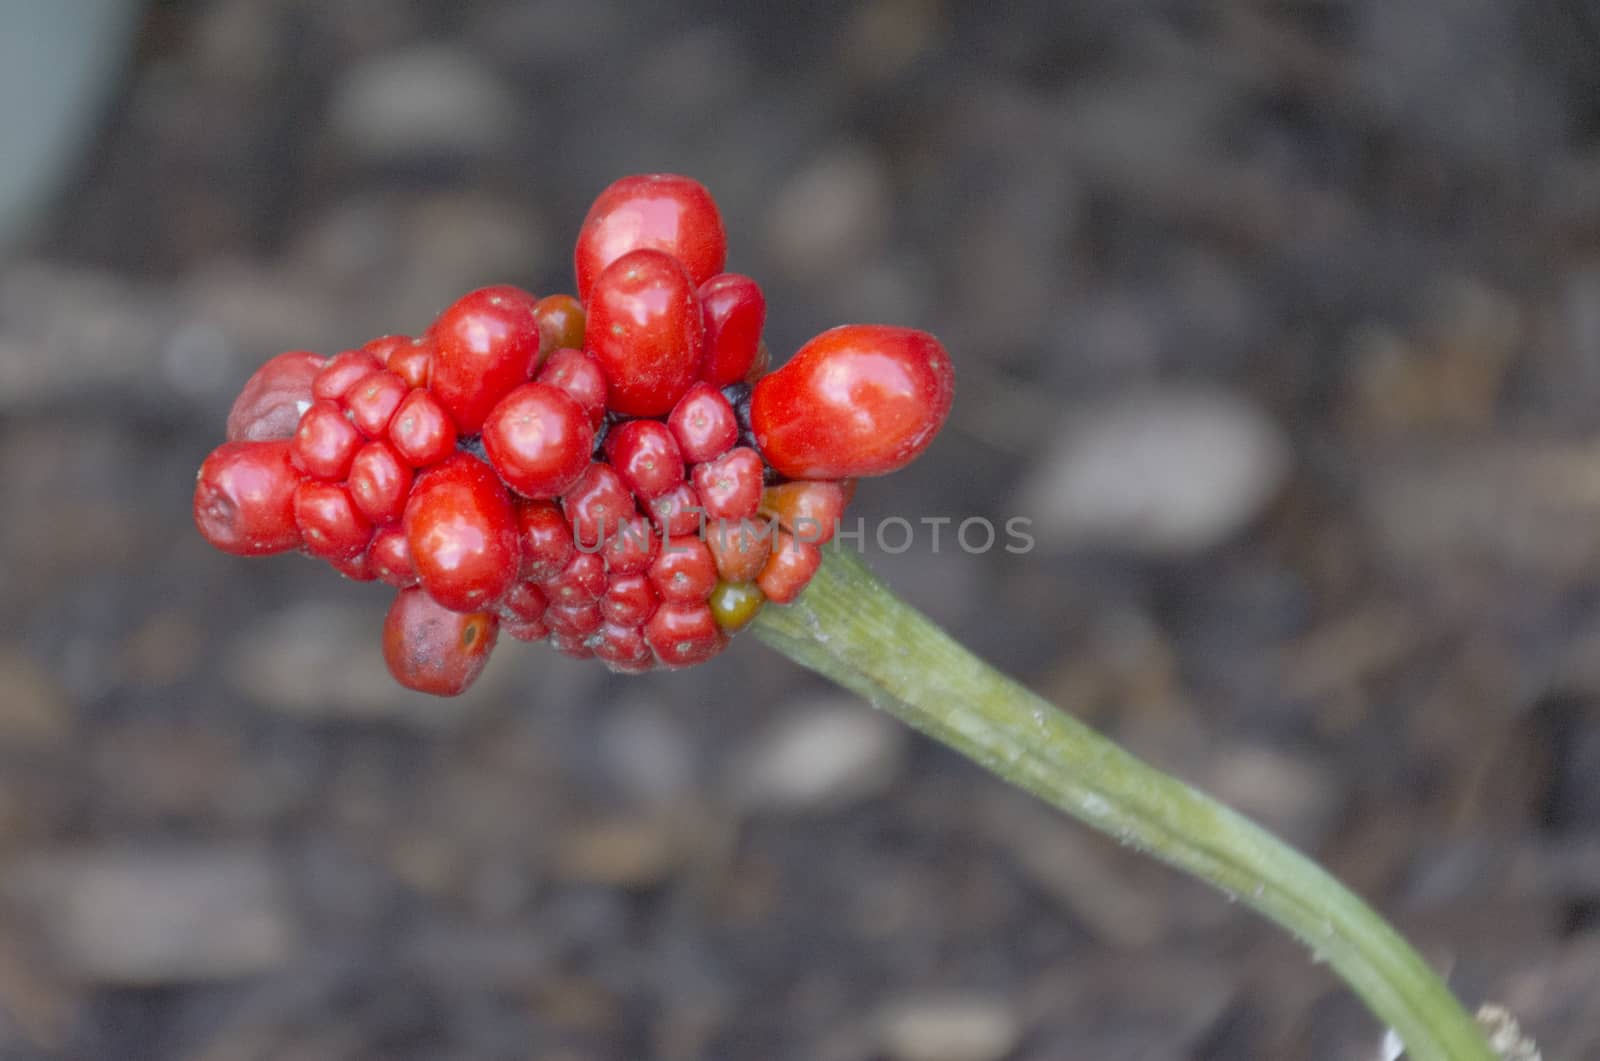 A cluster of berries on a stem.